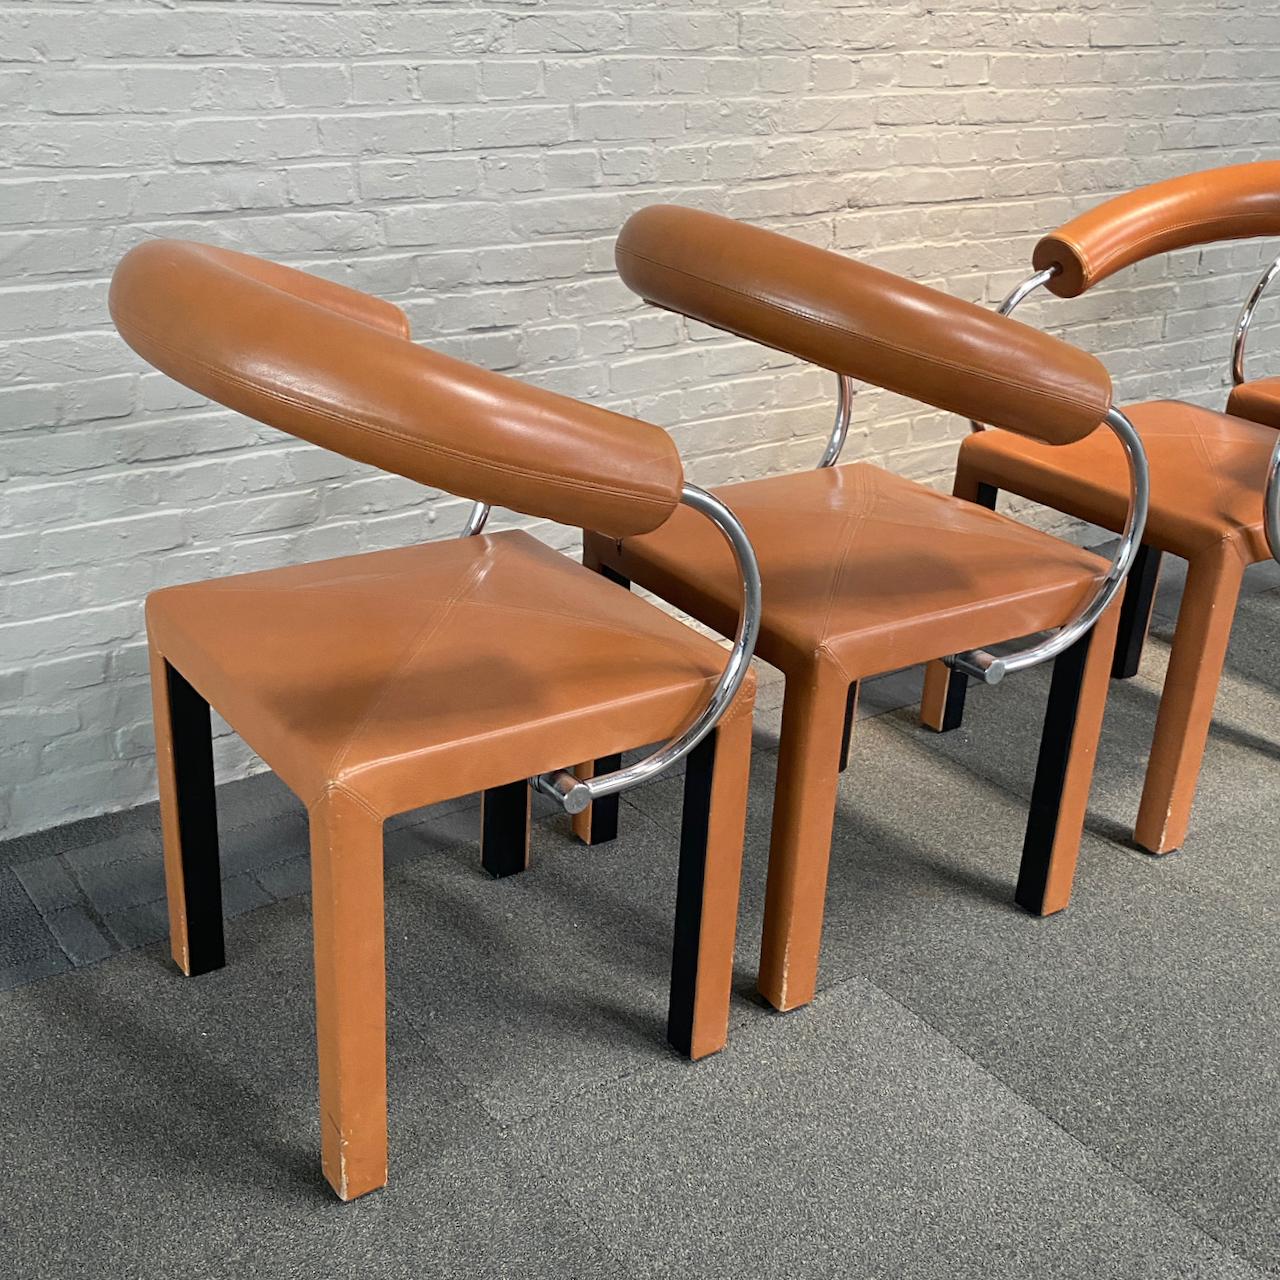 Hand-Crafted Set of 4 leather Arcosa chairs by Paolo Piva for B&B Italia